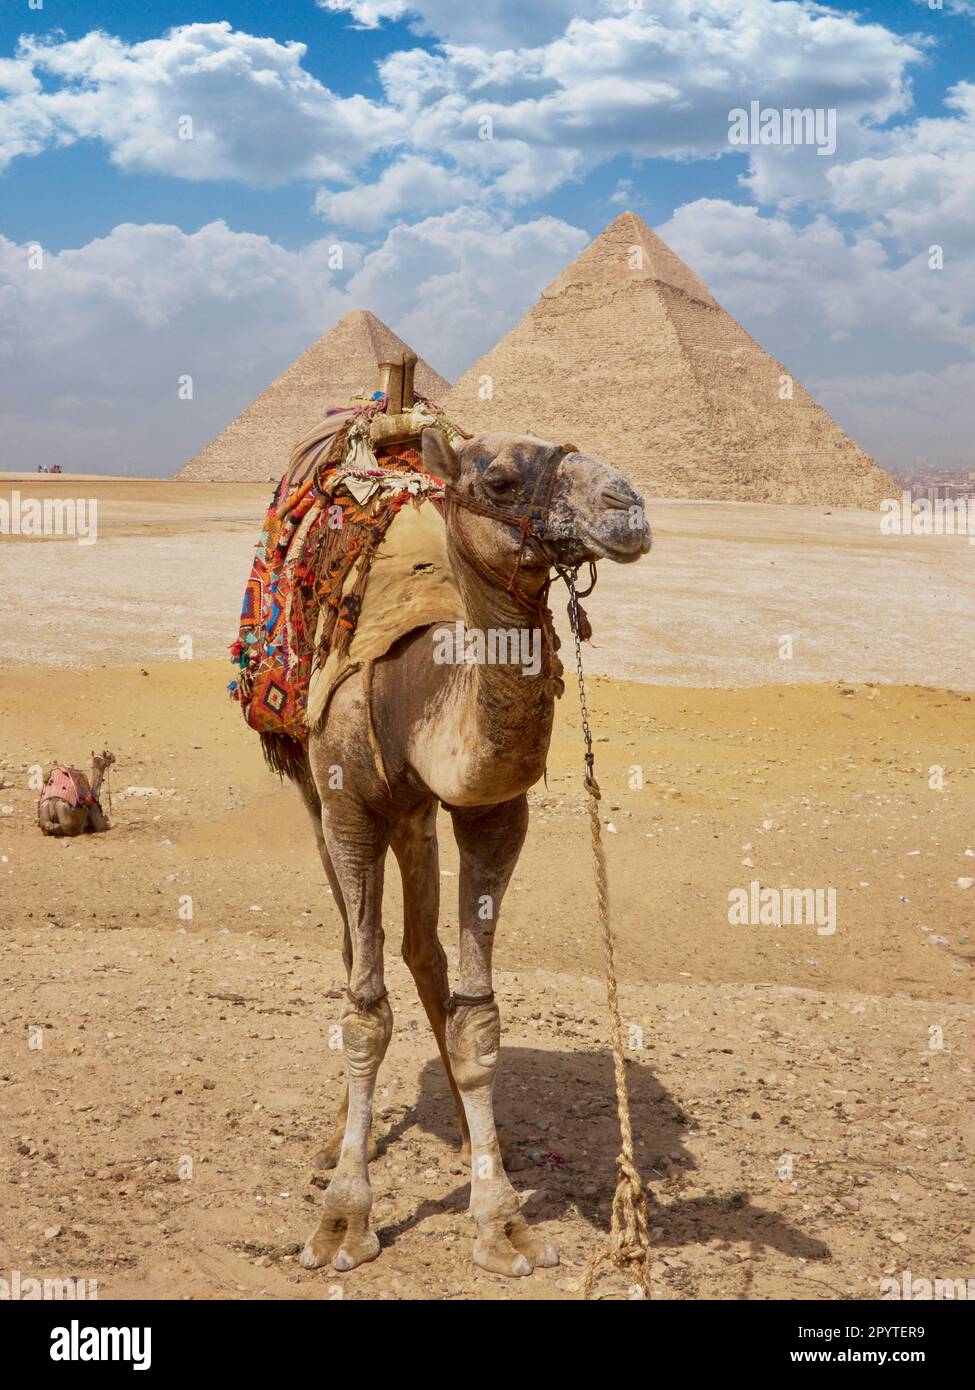 Egyptian pyramids in sand desert and clear sky Stock Photo